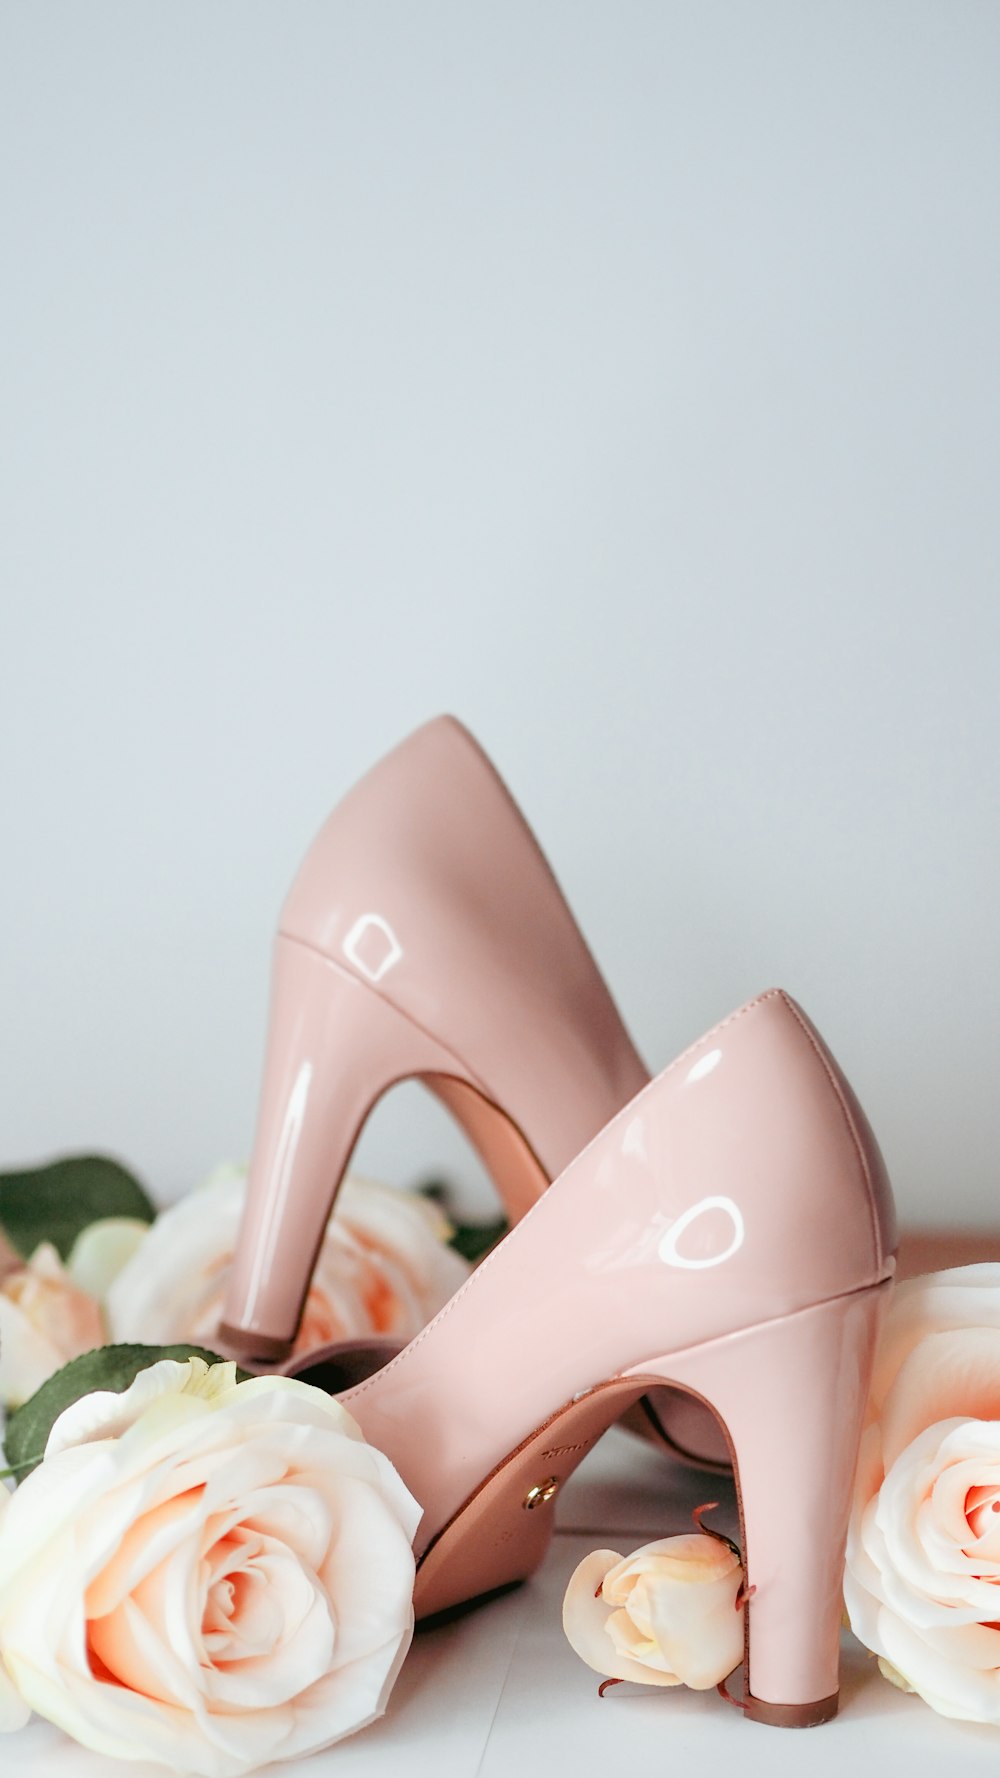 a pair of pink high heeled shoes next to roses